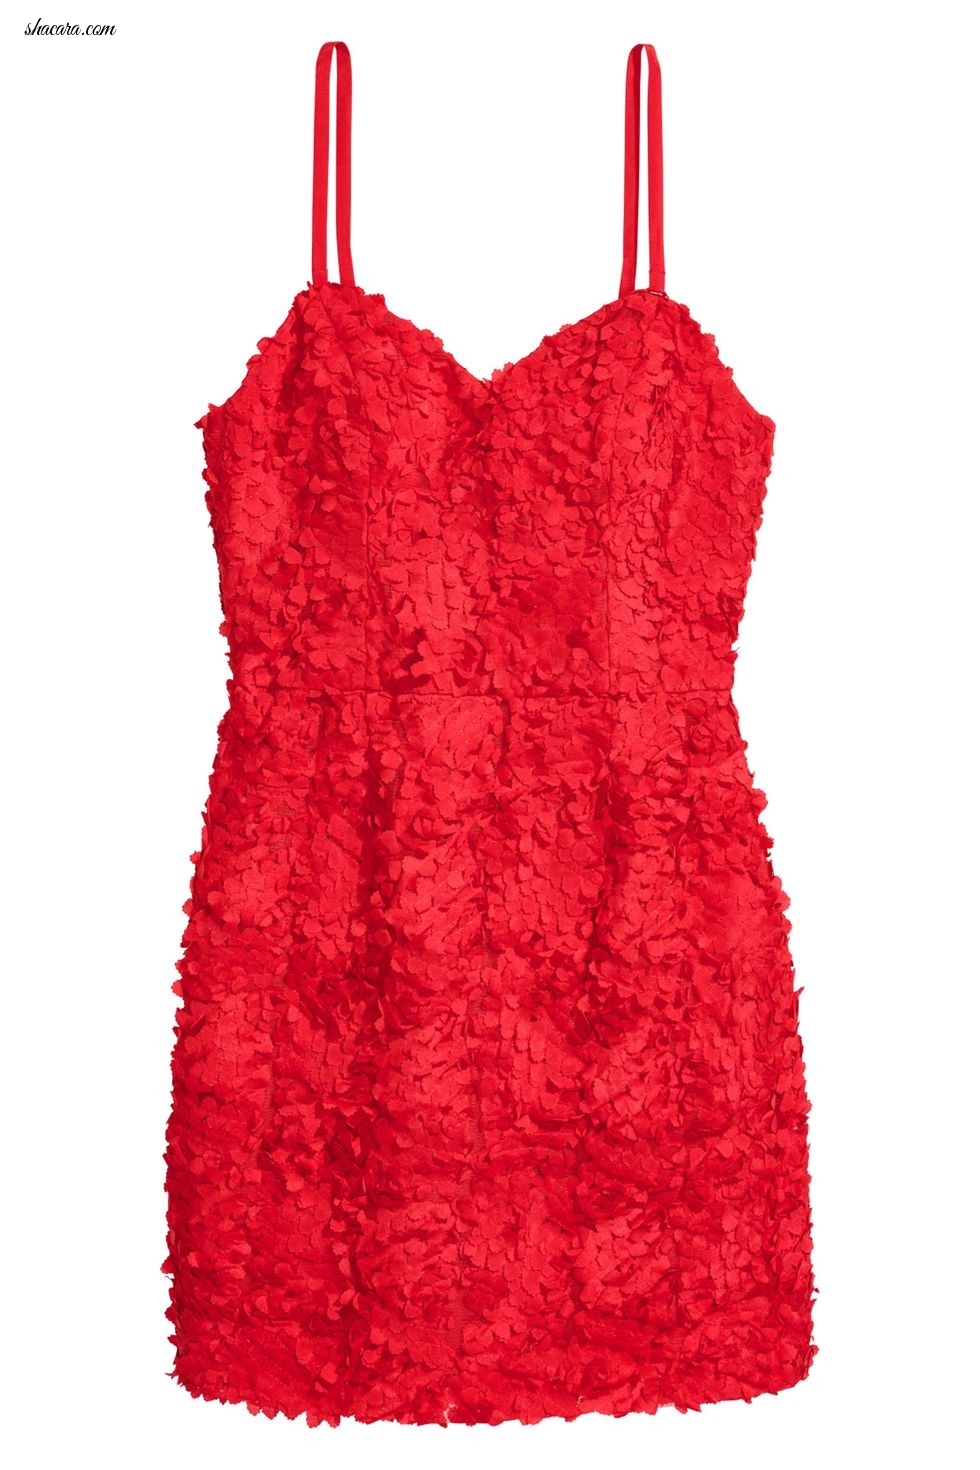 10 Date Night Dresses To Wear On Valentine’s Day